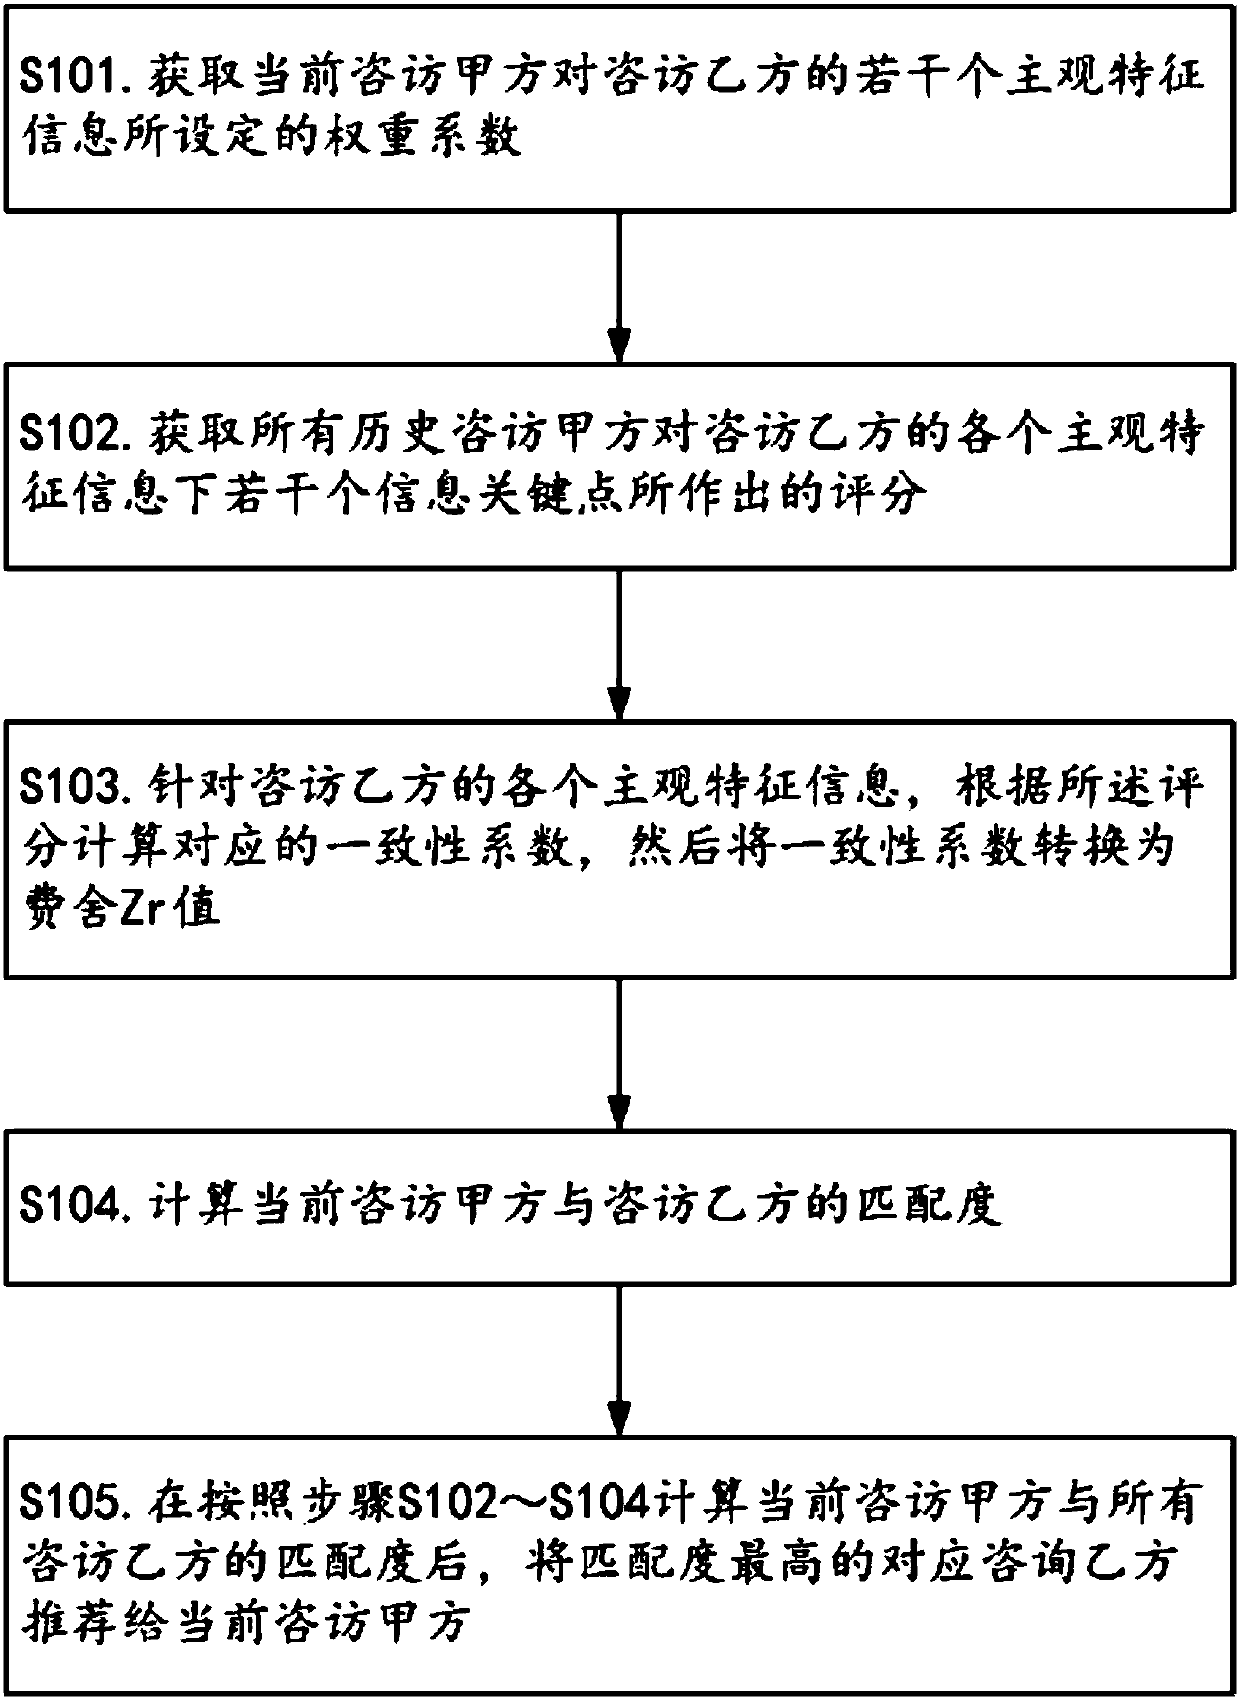 Automatic counseling relationship matching method for psychological counseling appointment